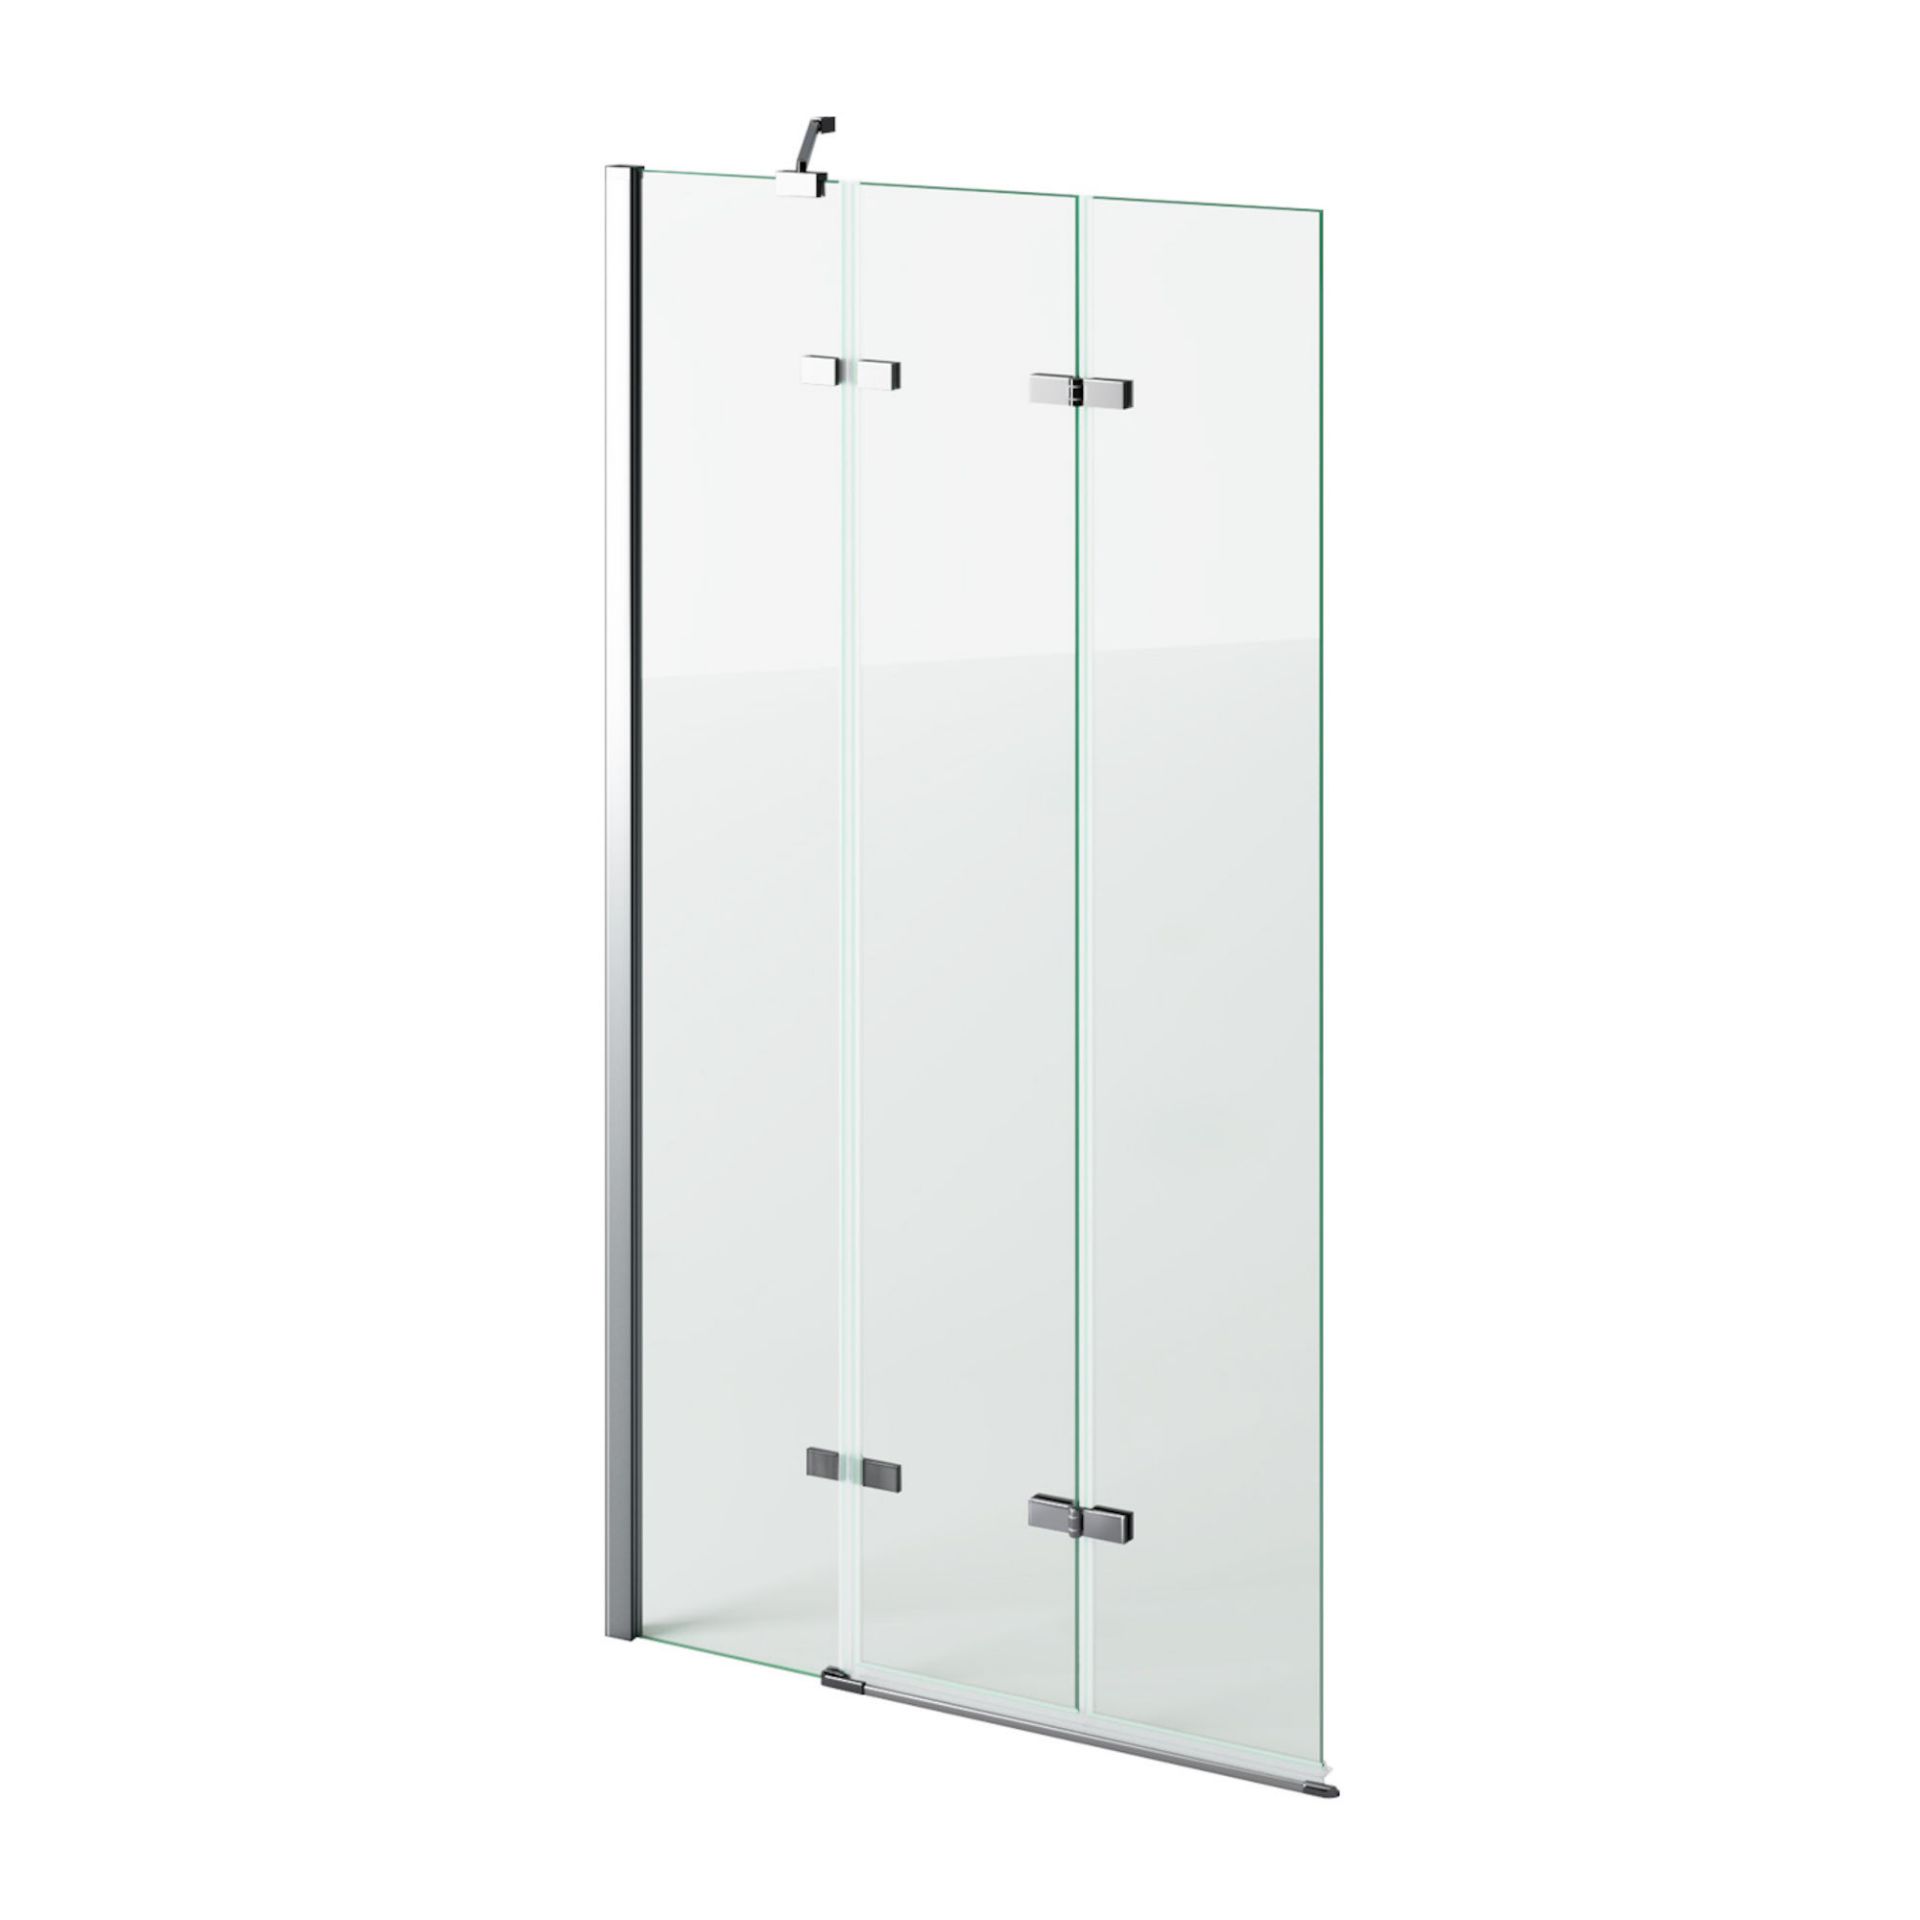 (MC69) 800mm Left Hand Folding Bath Screen - 6mm. RRP £249.99. EasyClean glass - Our glass has - Image 2 of 3